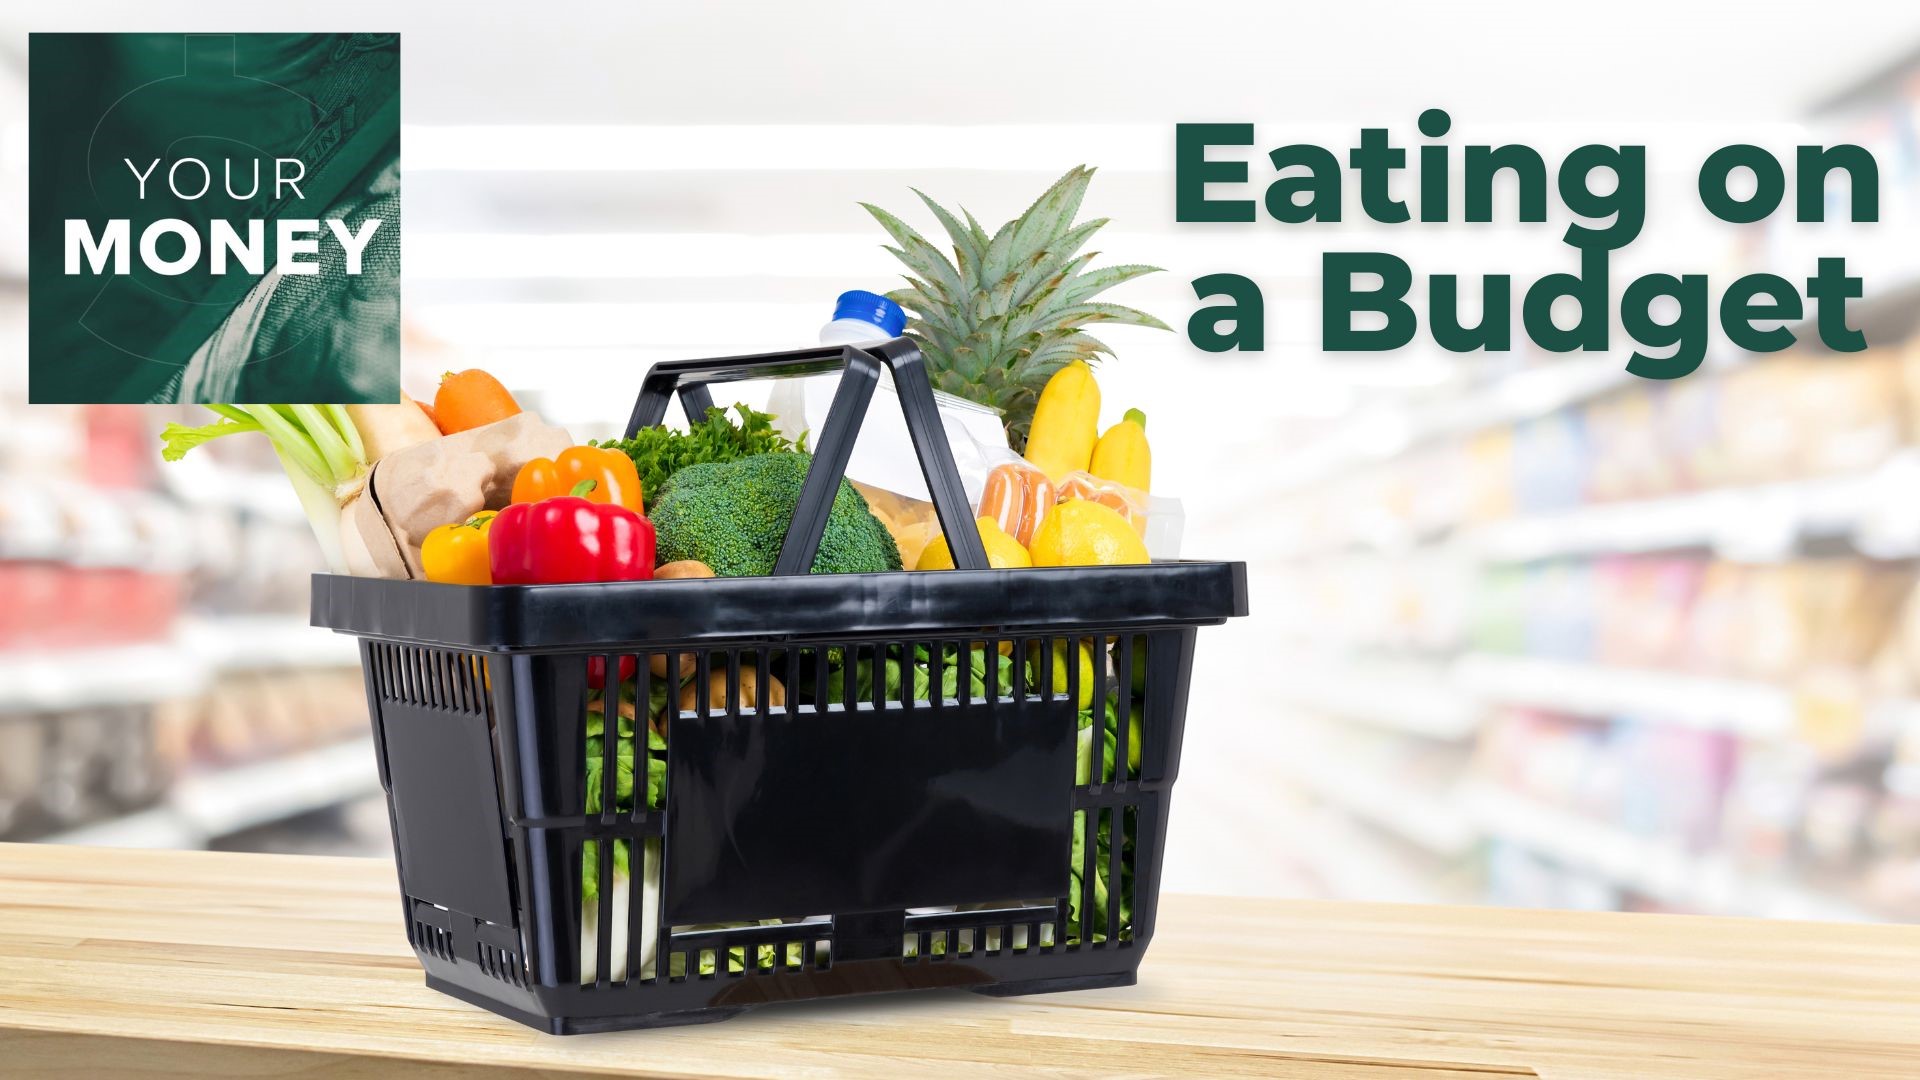 Gordon Severson shares how you can save money on food and groceries amid high prices. Tips for food budgeting, maximizing value and how you can reduce waste.